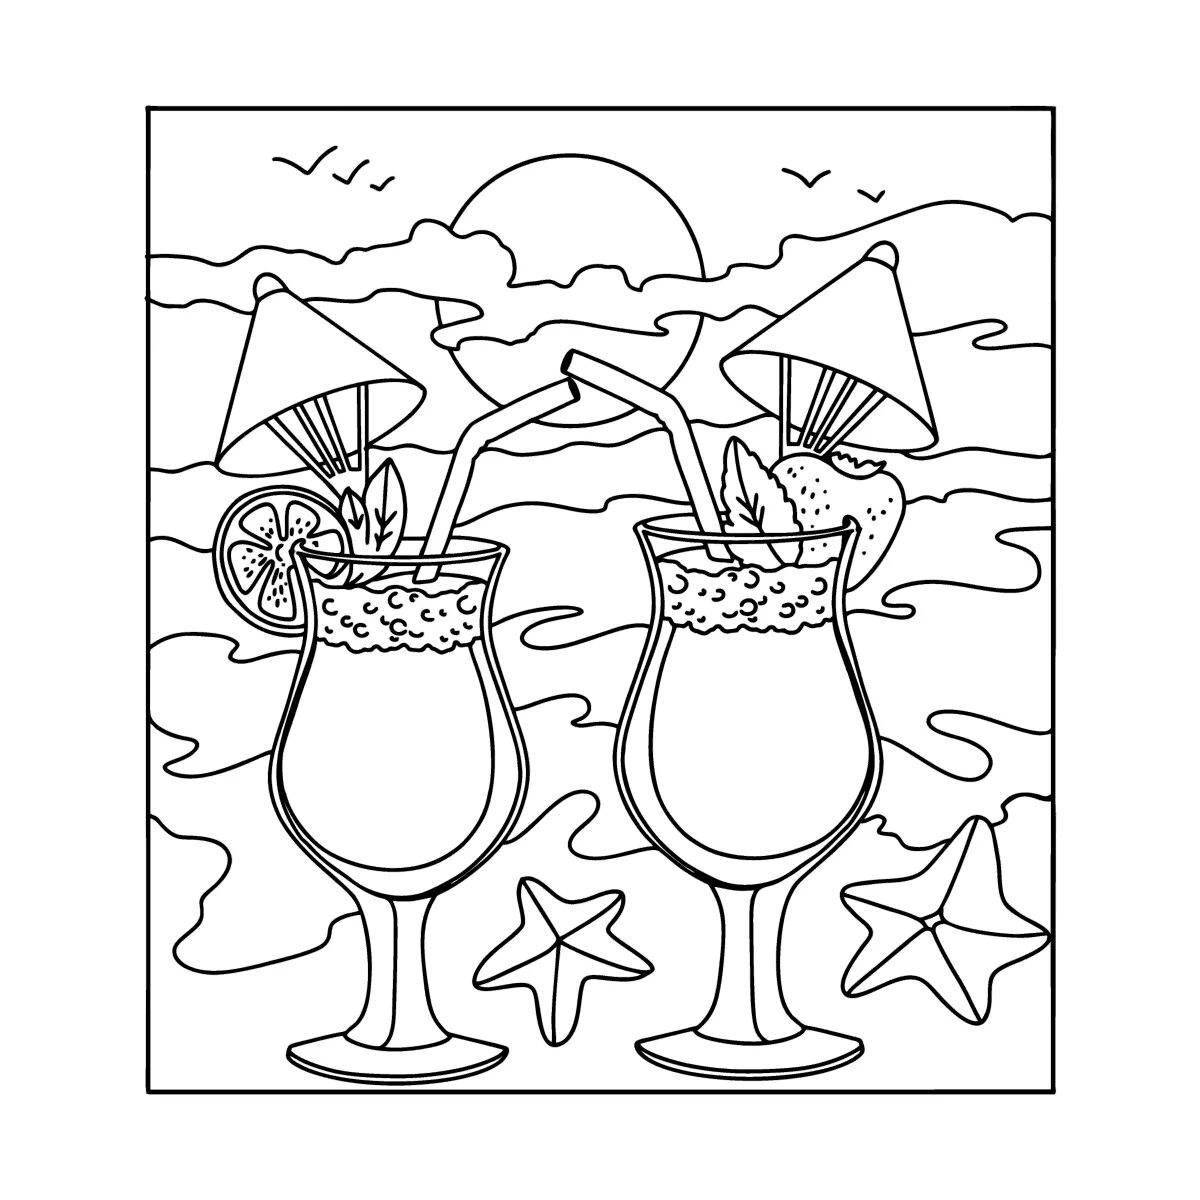 Glowing cocktail coloring page for kids